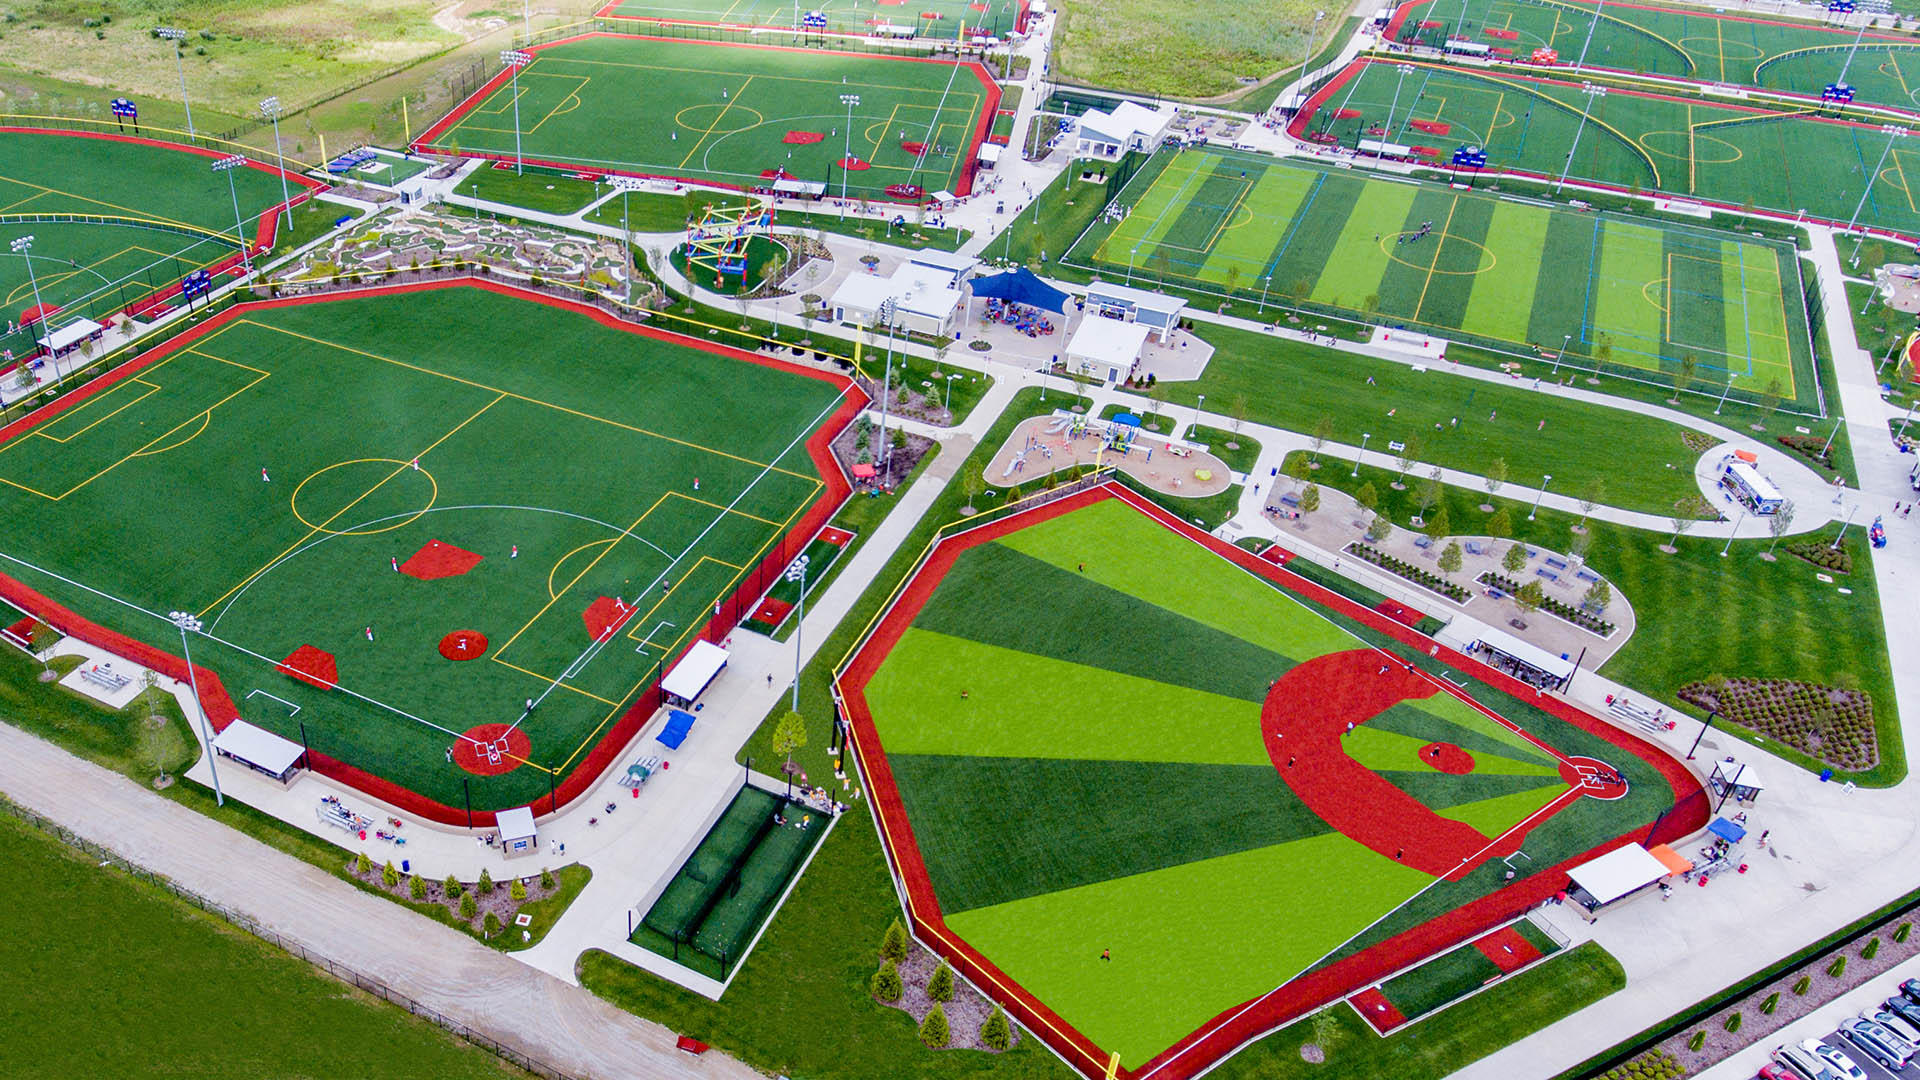 Sports Force Parks